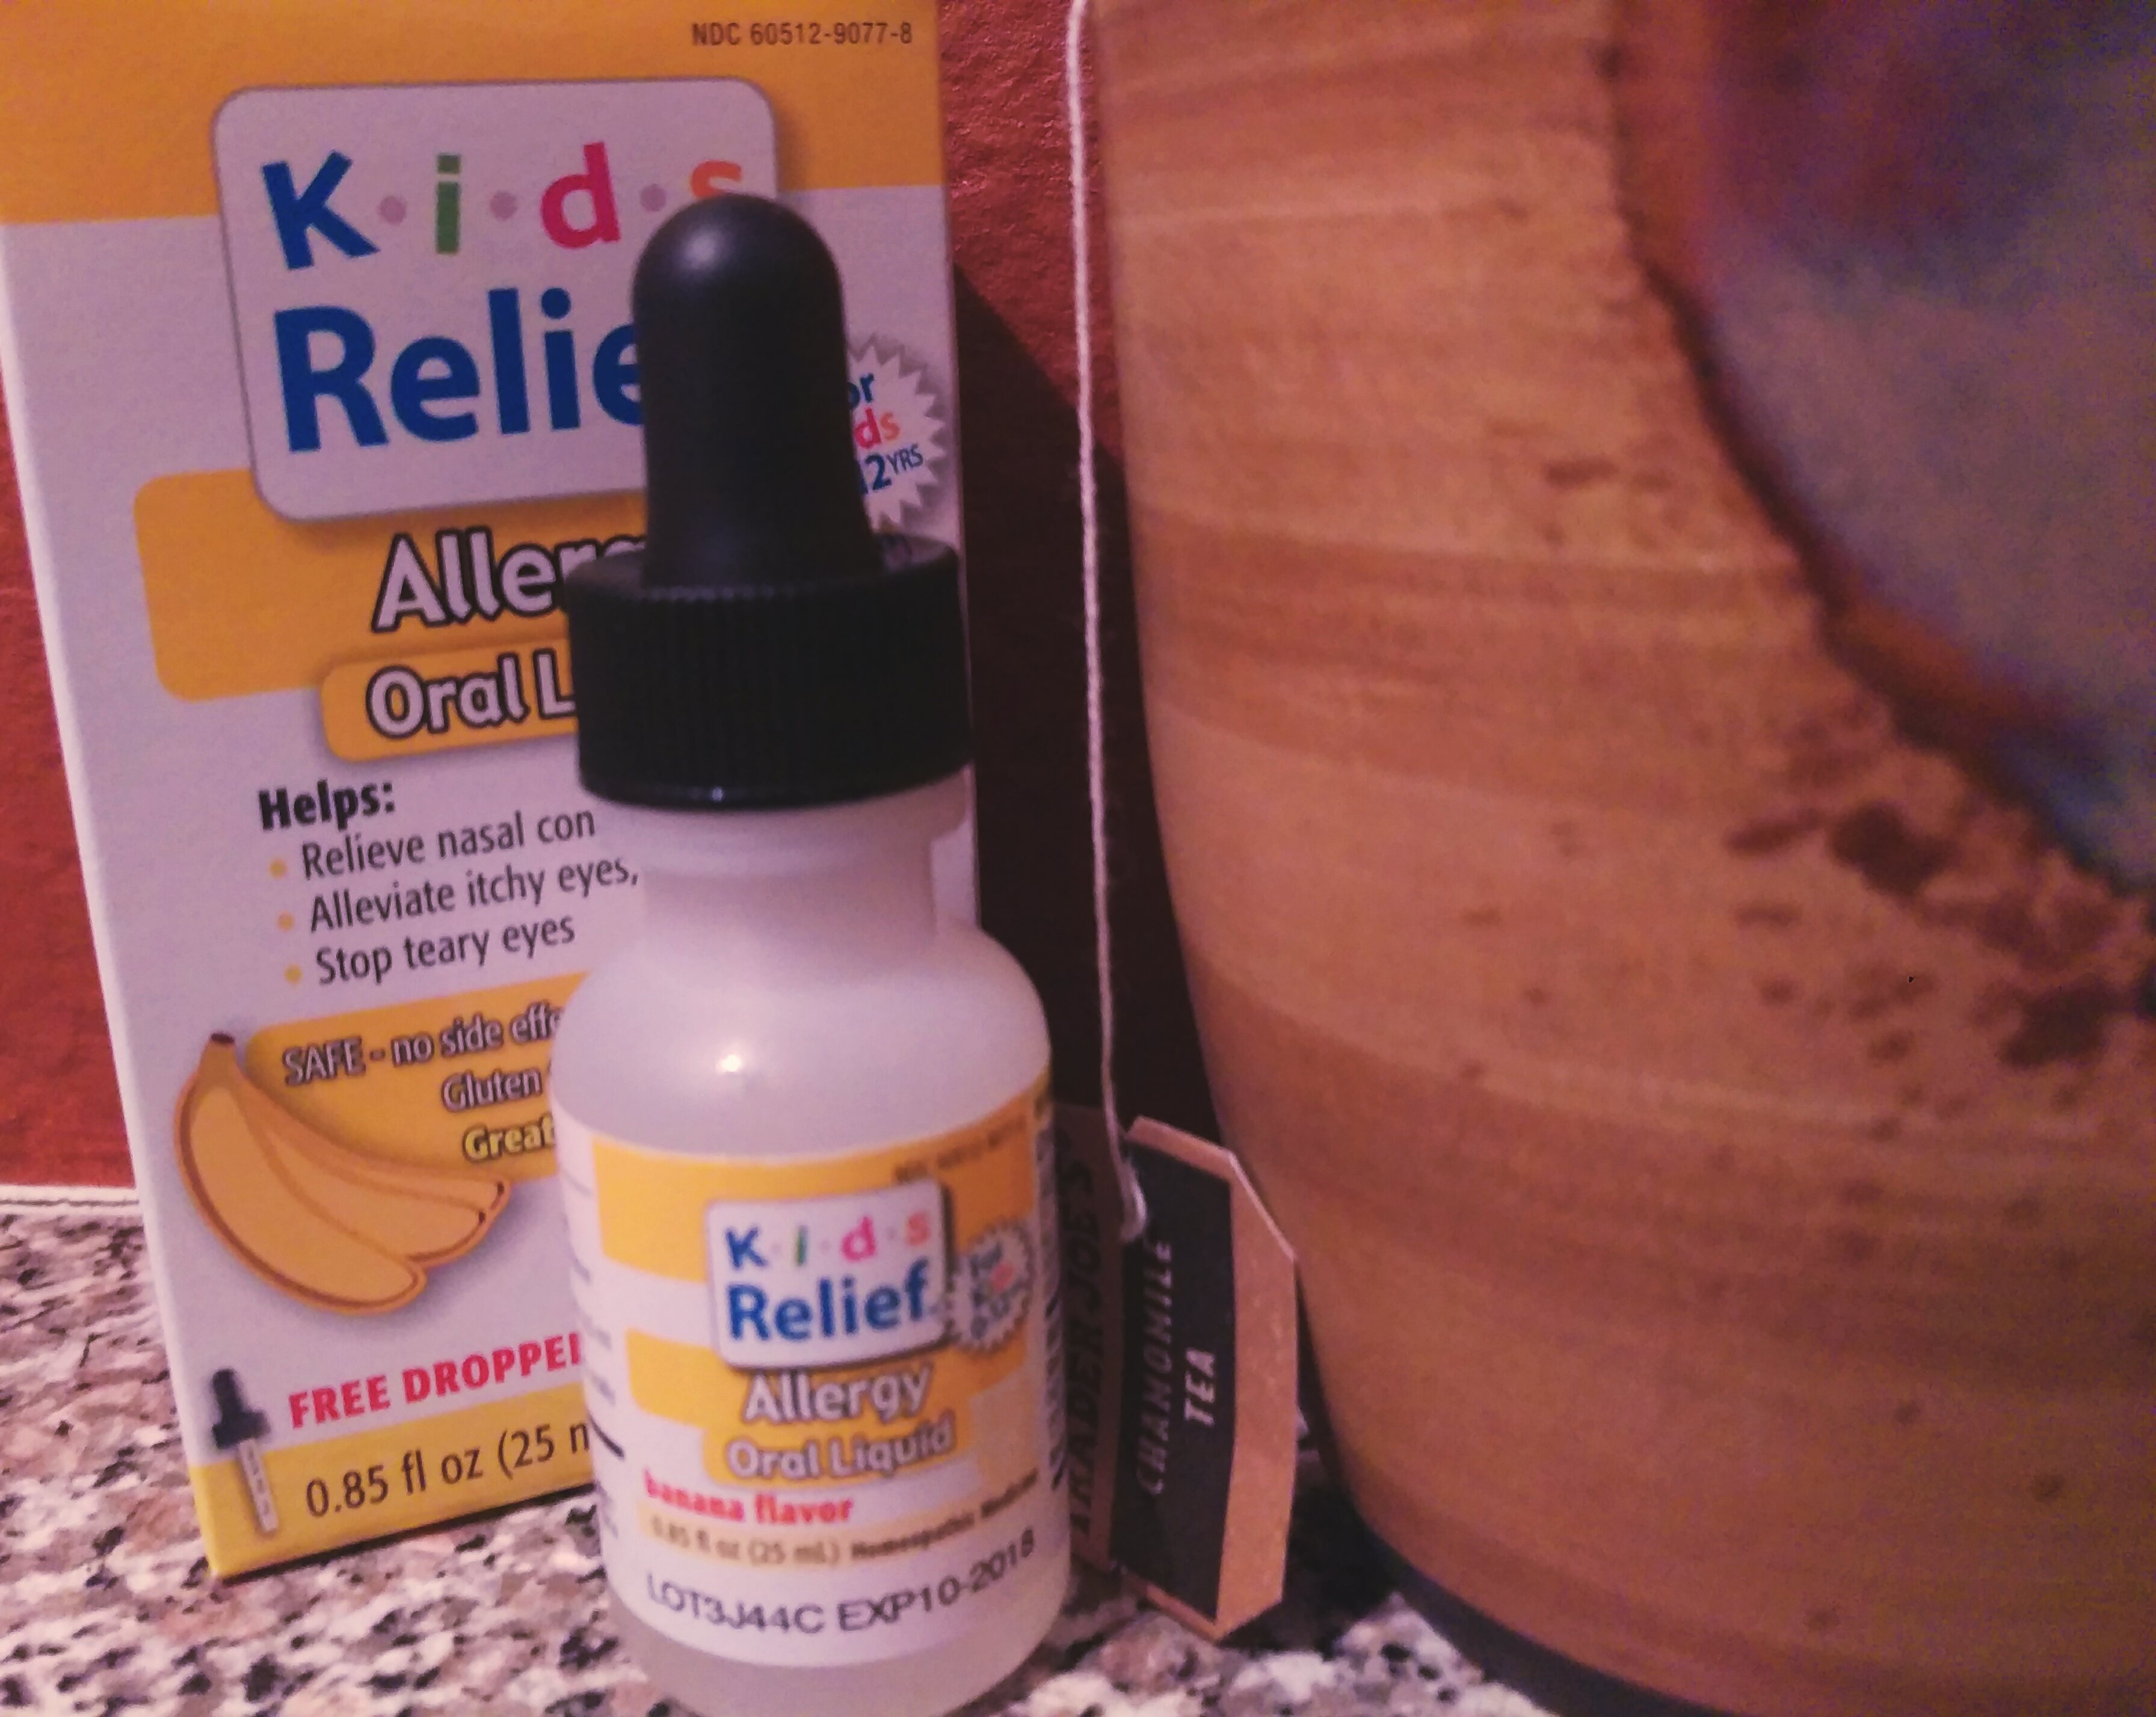 Enter to For A Chance To Win a Bottle of Kids Relief Allergy Oral Liquid